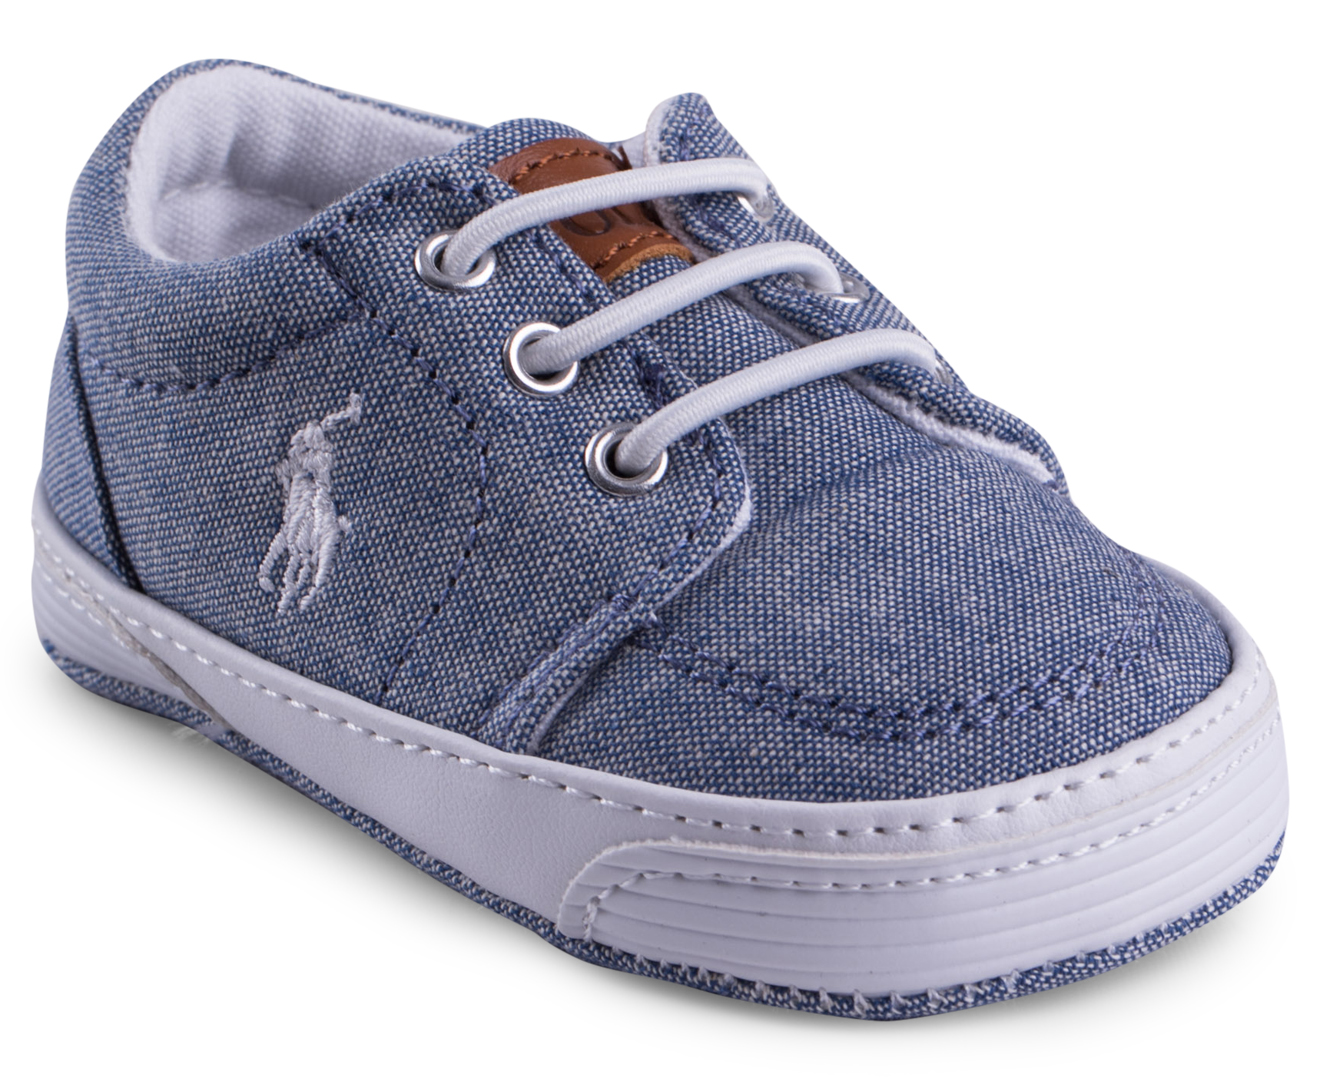 Ralph Lauren Baby Faxon Shoe - Blue Chambray | Great daily deals at ...